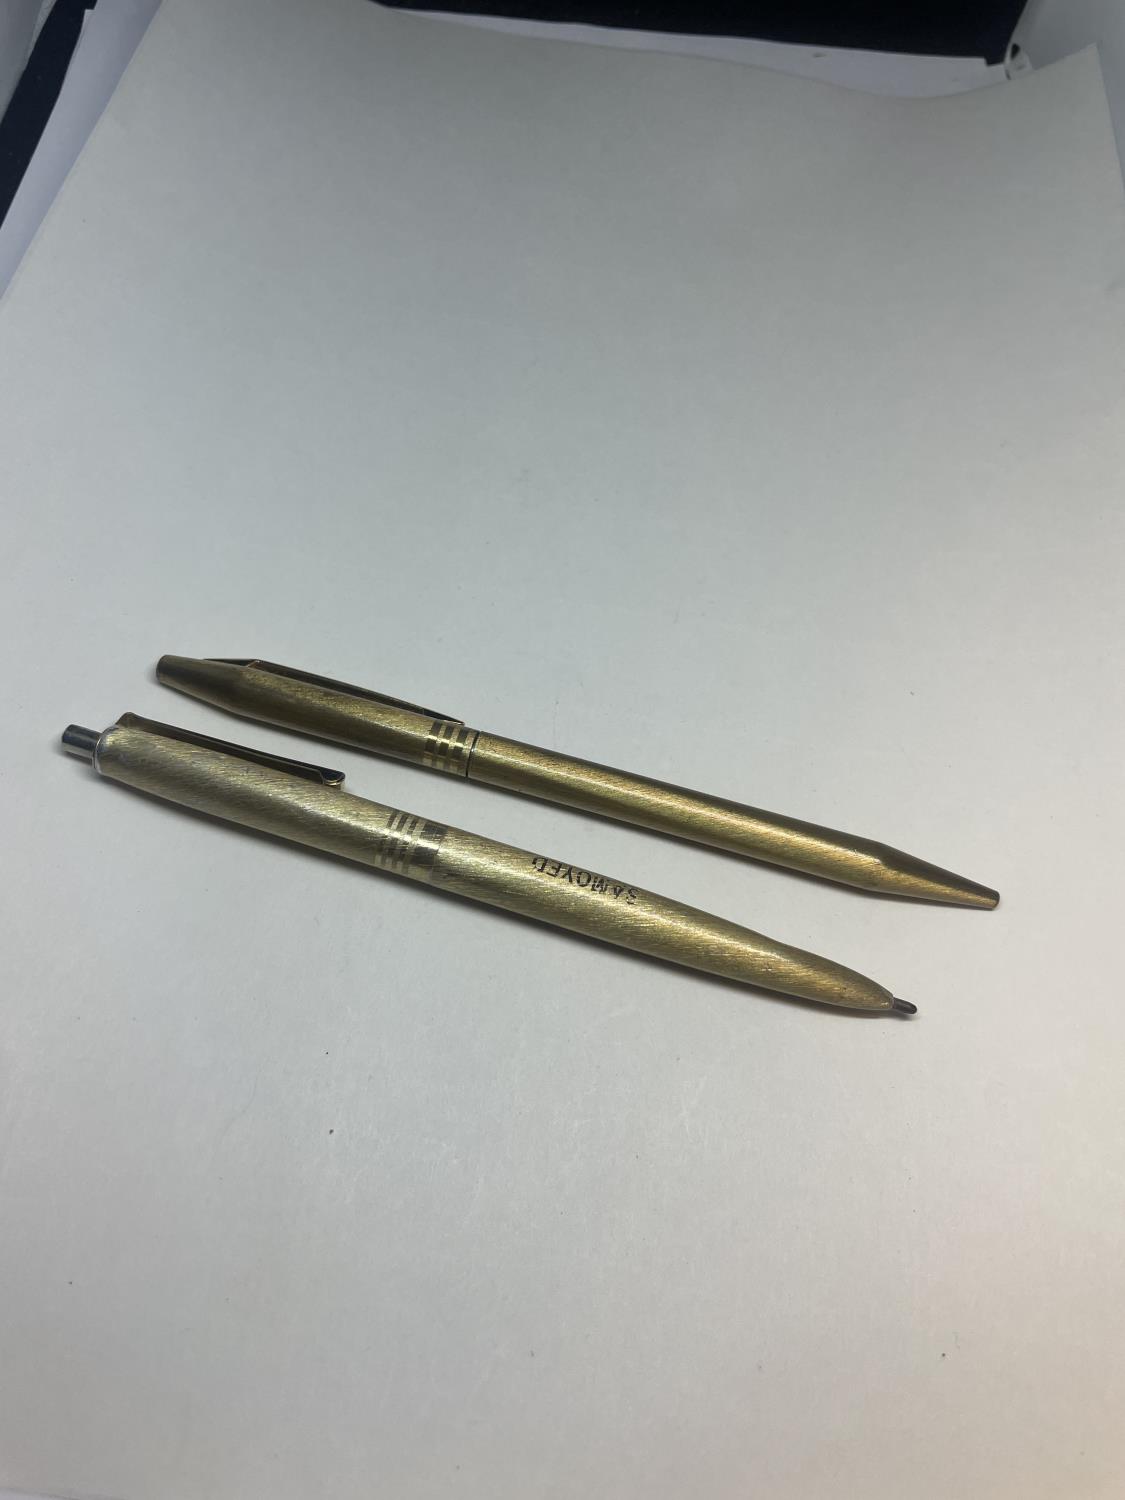 TWO GOLD PLATED PENS - Image 2 of 2